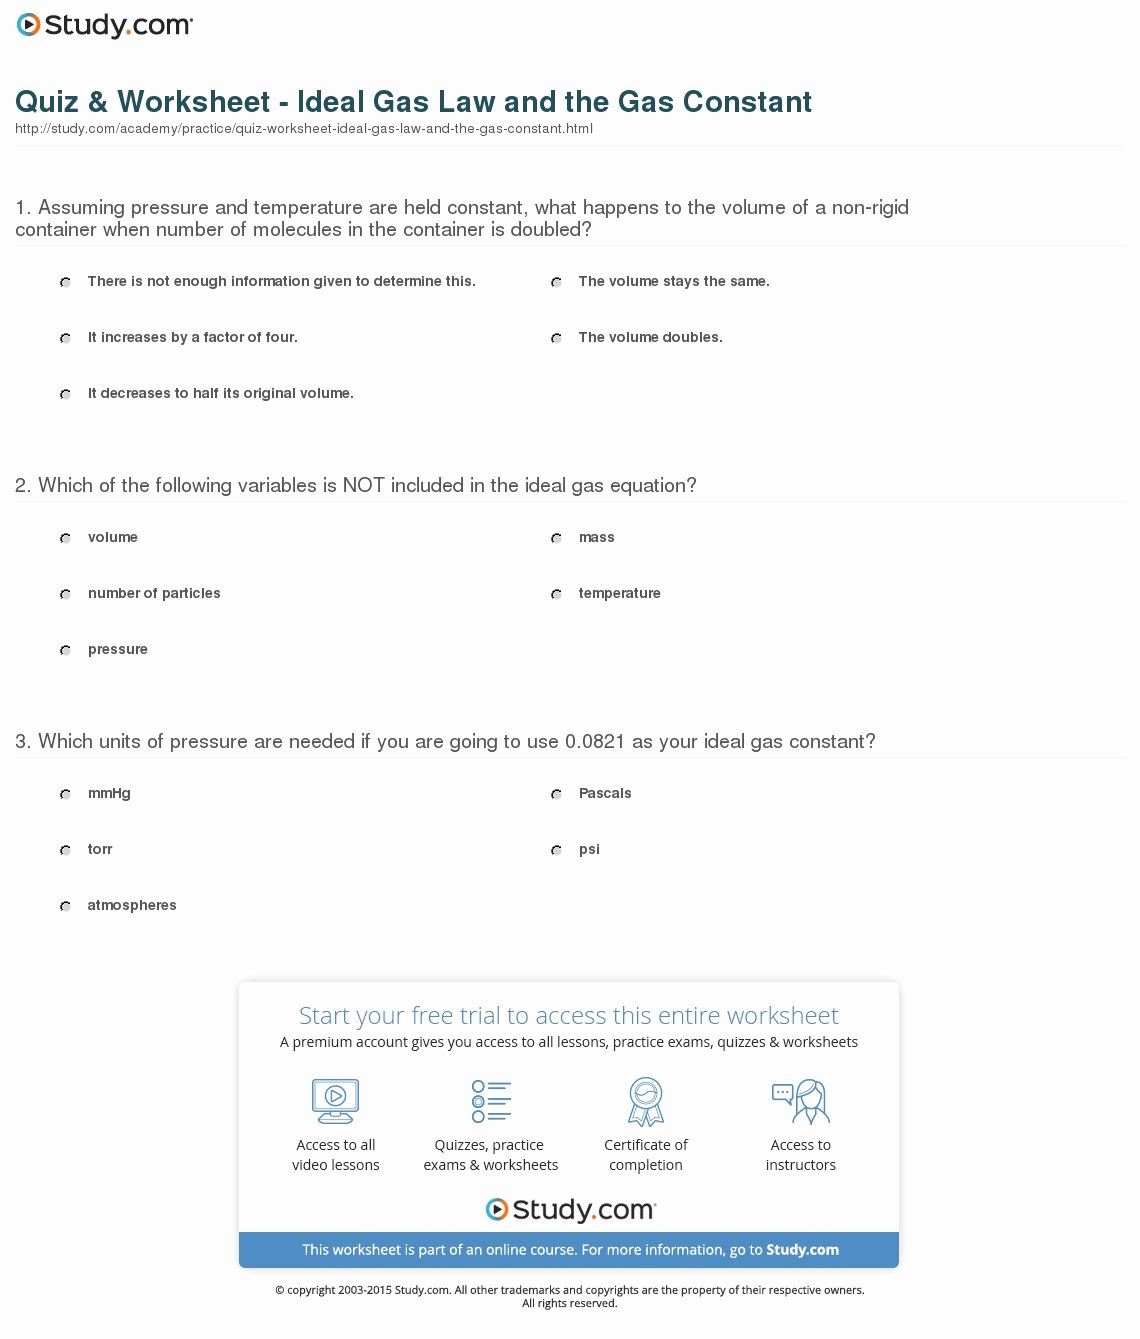 Ideal Gas Law Worksheet Lovely Quiz &amp; Worksheet Ideal Gas Law and the Gas Constant